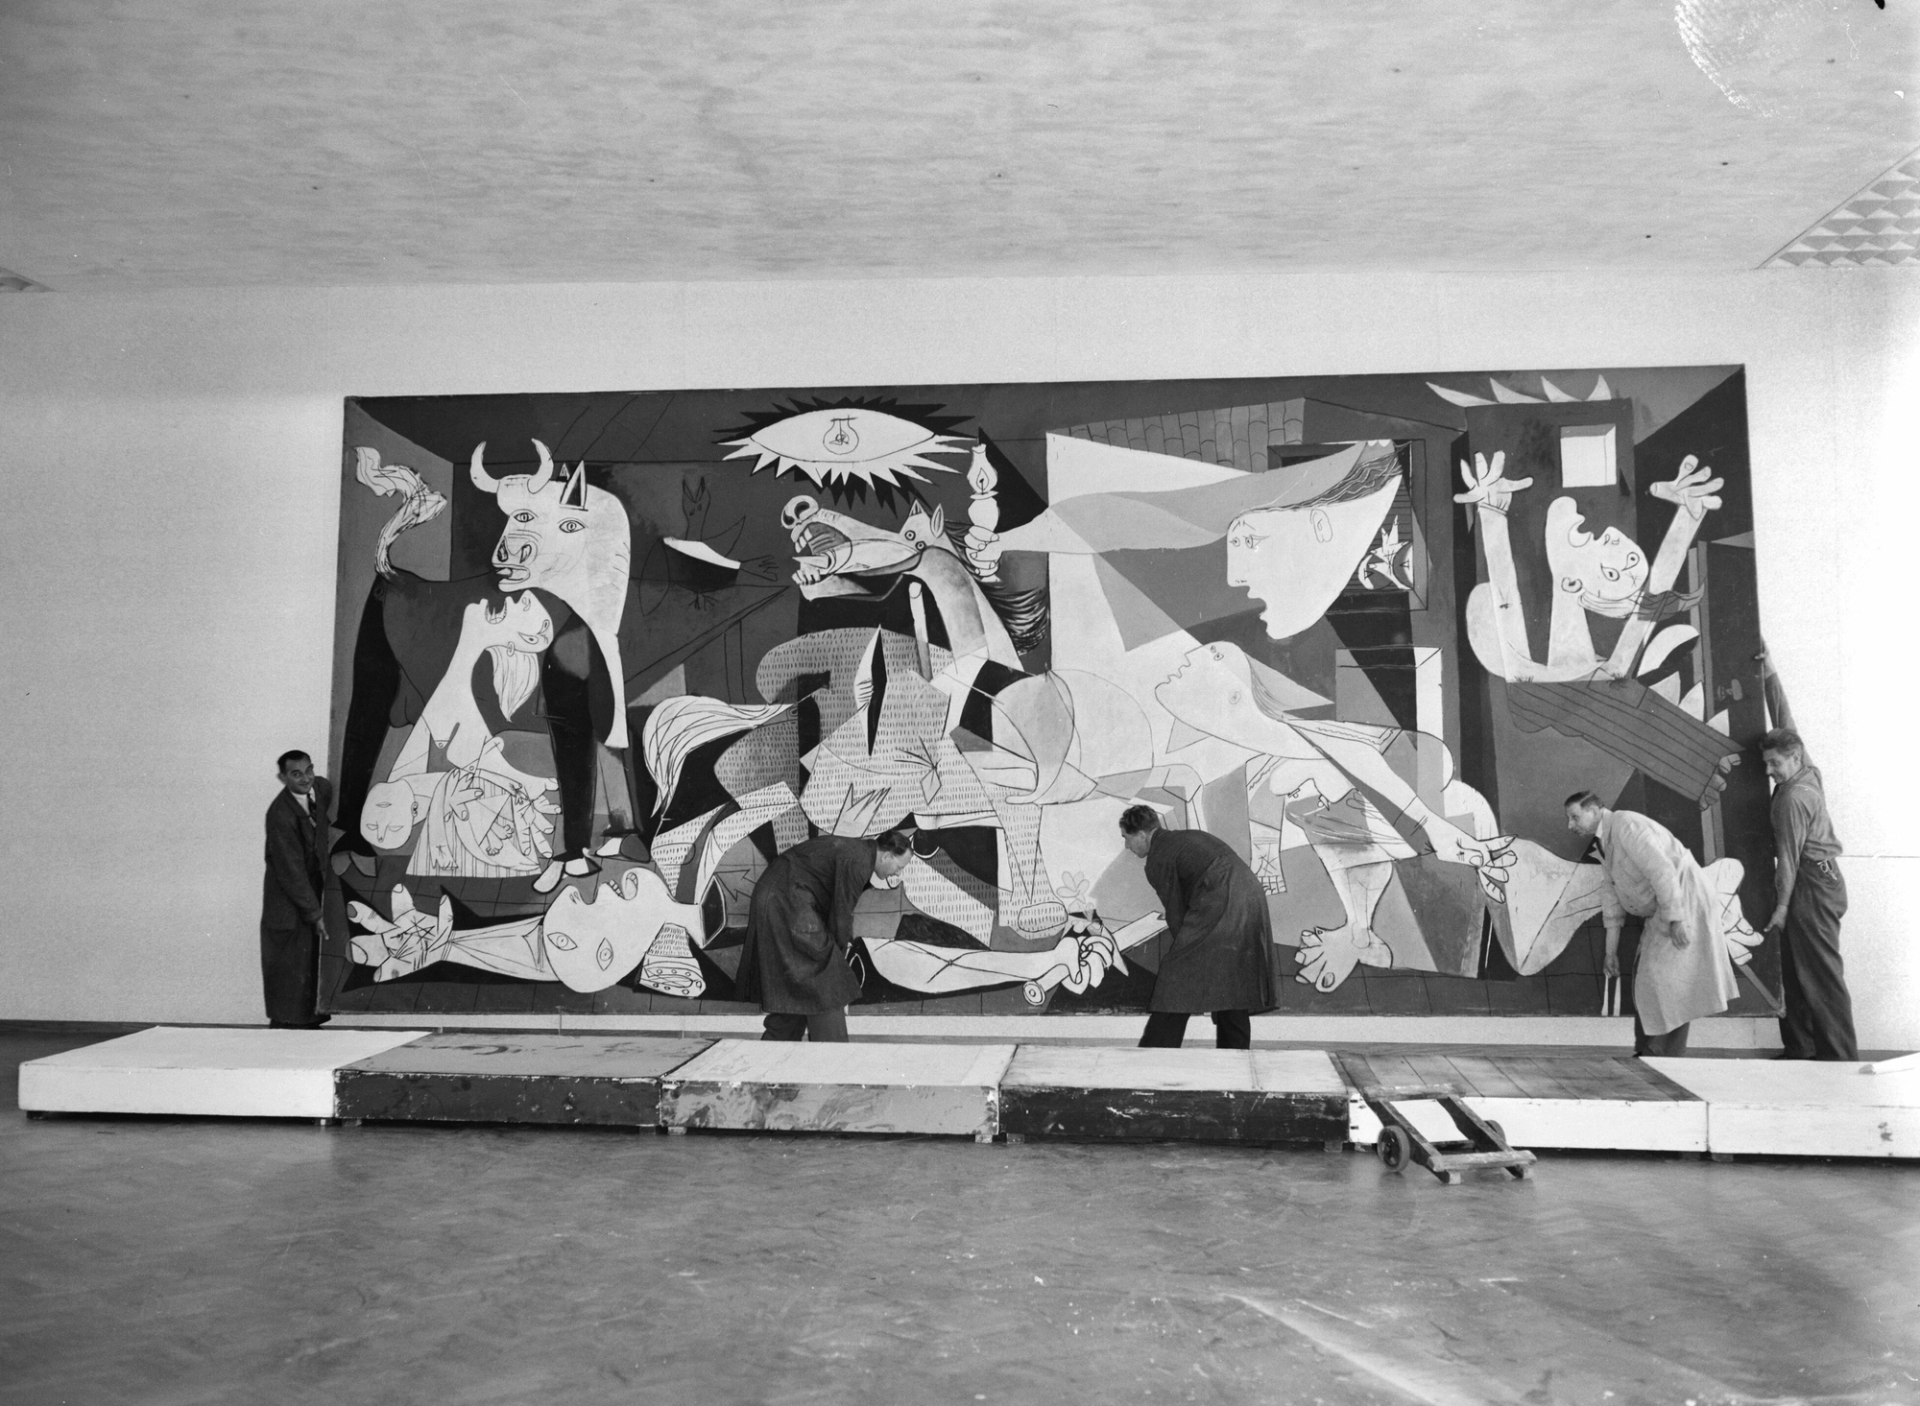 This black and white picture shows the installation of Guernica at the Stedelijk Museum in Amsterdam. 